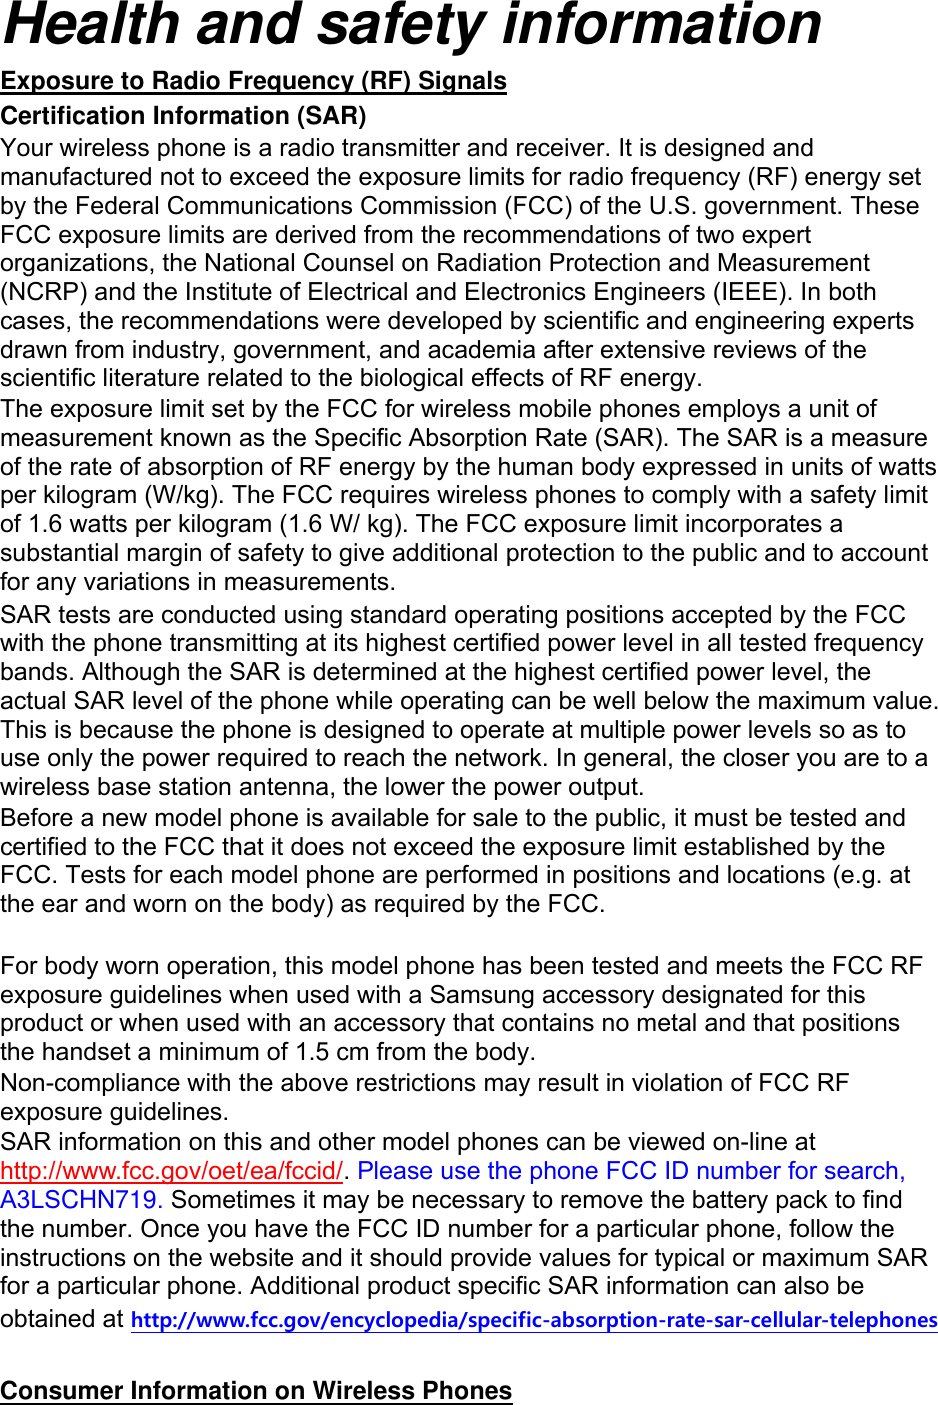 Health and safety information Exposure to Radio Frequency (RF) Signals Certification Information (SAR) Your wireless phone is a radio transmitter and receiver. It is designed and manufactured not to exceed the exposure limits for radio frequency (RF) energy set by the Federal Communications Commission (FCC) of the U.S. government. These FCC exposure limits are derived from the recommendations of two expert organizations, the National Counsel on Radiation Protection and Measurement (NCRP) and the Institute of Electrical and Electronics Engineers (IEEE). In both cases, the recommendations were developed by scientific and engineering experts drawn from industry, government, and academia after extensive reviews of the scientific literature related to the biological effects of RF energy. The exposure limit set by the FCC for wireless mobile phones employs a unit of measurement known as the Specific Absorption Rate (SAR). The SAR is a measure of the rate of absorption of RF energy by the human body expressed in units of watts per kilogram (W/kg). The FCC requires wireless phones to comply with a safety limit of 1.6 watts per kilogram (1.6 W/ kg). The FCC exposure limit incorporates a substantial margin of safety to give additional protection to the public and to account for any variations in measurements. SAR tests are conducted using standard operating positions accepted by the FCC with the phone transmitting at its highest certified power level in all tested frequency bands. Although the SAR is determined at the highest certified power level, the actual SAR level of the phone while operating can be well below the maximum value. This is because the phone is designed to operate at multiple power levels so as to use only the power required to reach the network. In general, the closer you are to a wireless base station antenna, the lower the power output. Before a new model phone is available for sale to the public, it must be tested and certified to the FCC that it does not exceed the exposure limit established by the FCC. Tests for each model phone are performed in positions and locations (e.g. at the ear and worn on the body) as required by the FCC.      For body worn operation, this model phone has been tested and meets the FCC RF exposure guidelines when used with a Samsung accessory designated for this product or when used with an accessory that contains no metal and that positions the handset a minimum of 1.5 cm from the body.   Non-compliance with the above restrictions may result in violation of FCC RF exposure guidelines. SAR information on this and other model phones can be viewed on-line at http://www.fcc.gov/oet/ea/fccid/. Please use the phone FCC ID number for search, A3LSCHN719. Sometimes it may be necessary to remove the battery pack to find the number. Once you have the FCC ID number for a particular phone, follow the instructions on the website and it should provide values for typical or maximum SAR for a particular phone. Additional product specific SAR information can also be obtained at http://www.fcc.gov/encyclopedia/specific-absorption-rate-sar-cellular-telephones  Consumer Information on Wireless Phones 